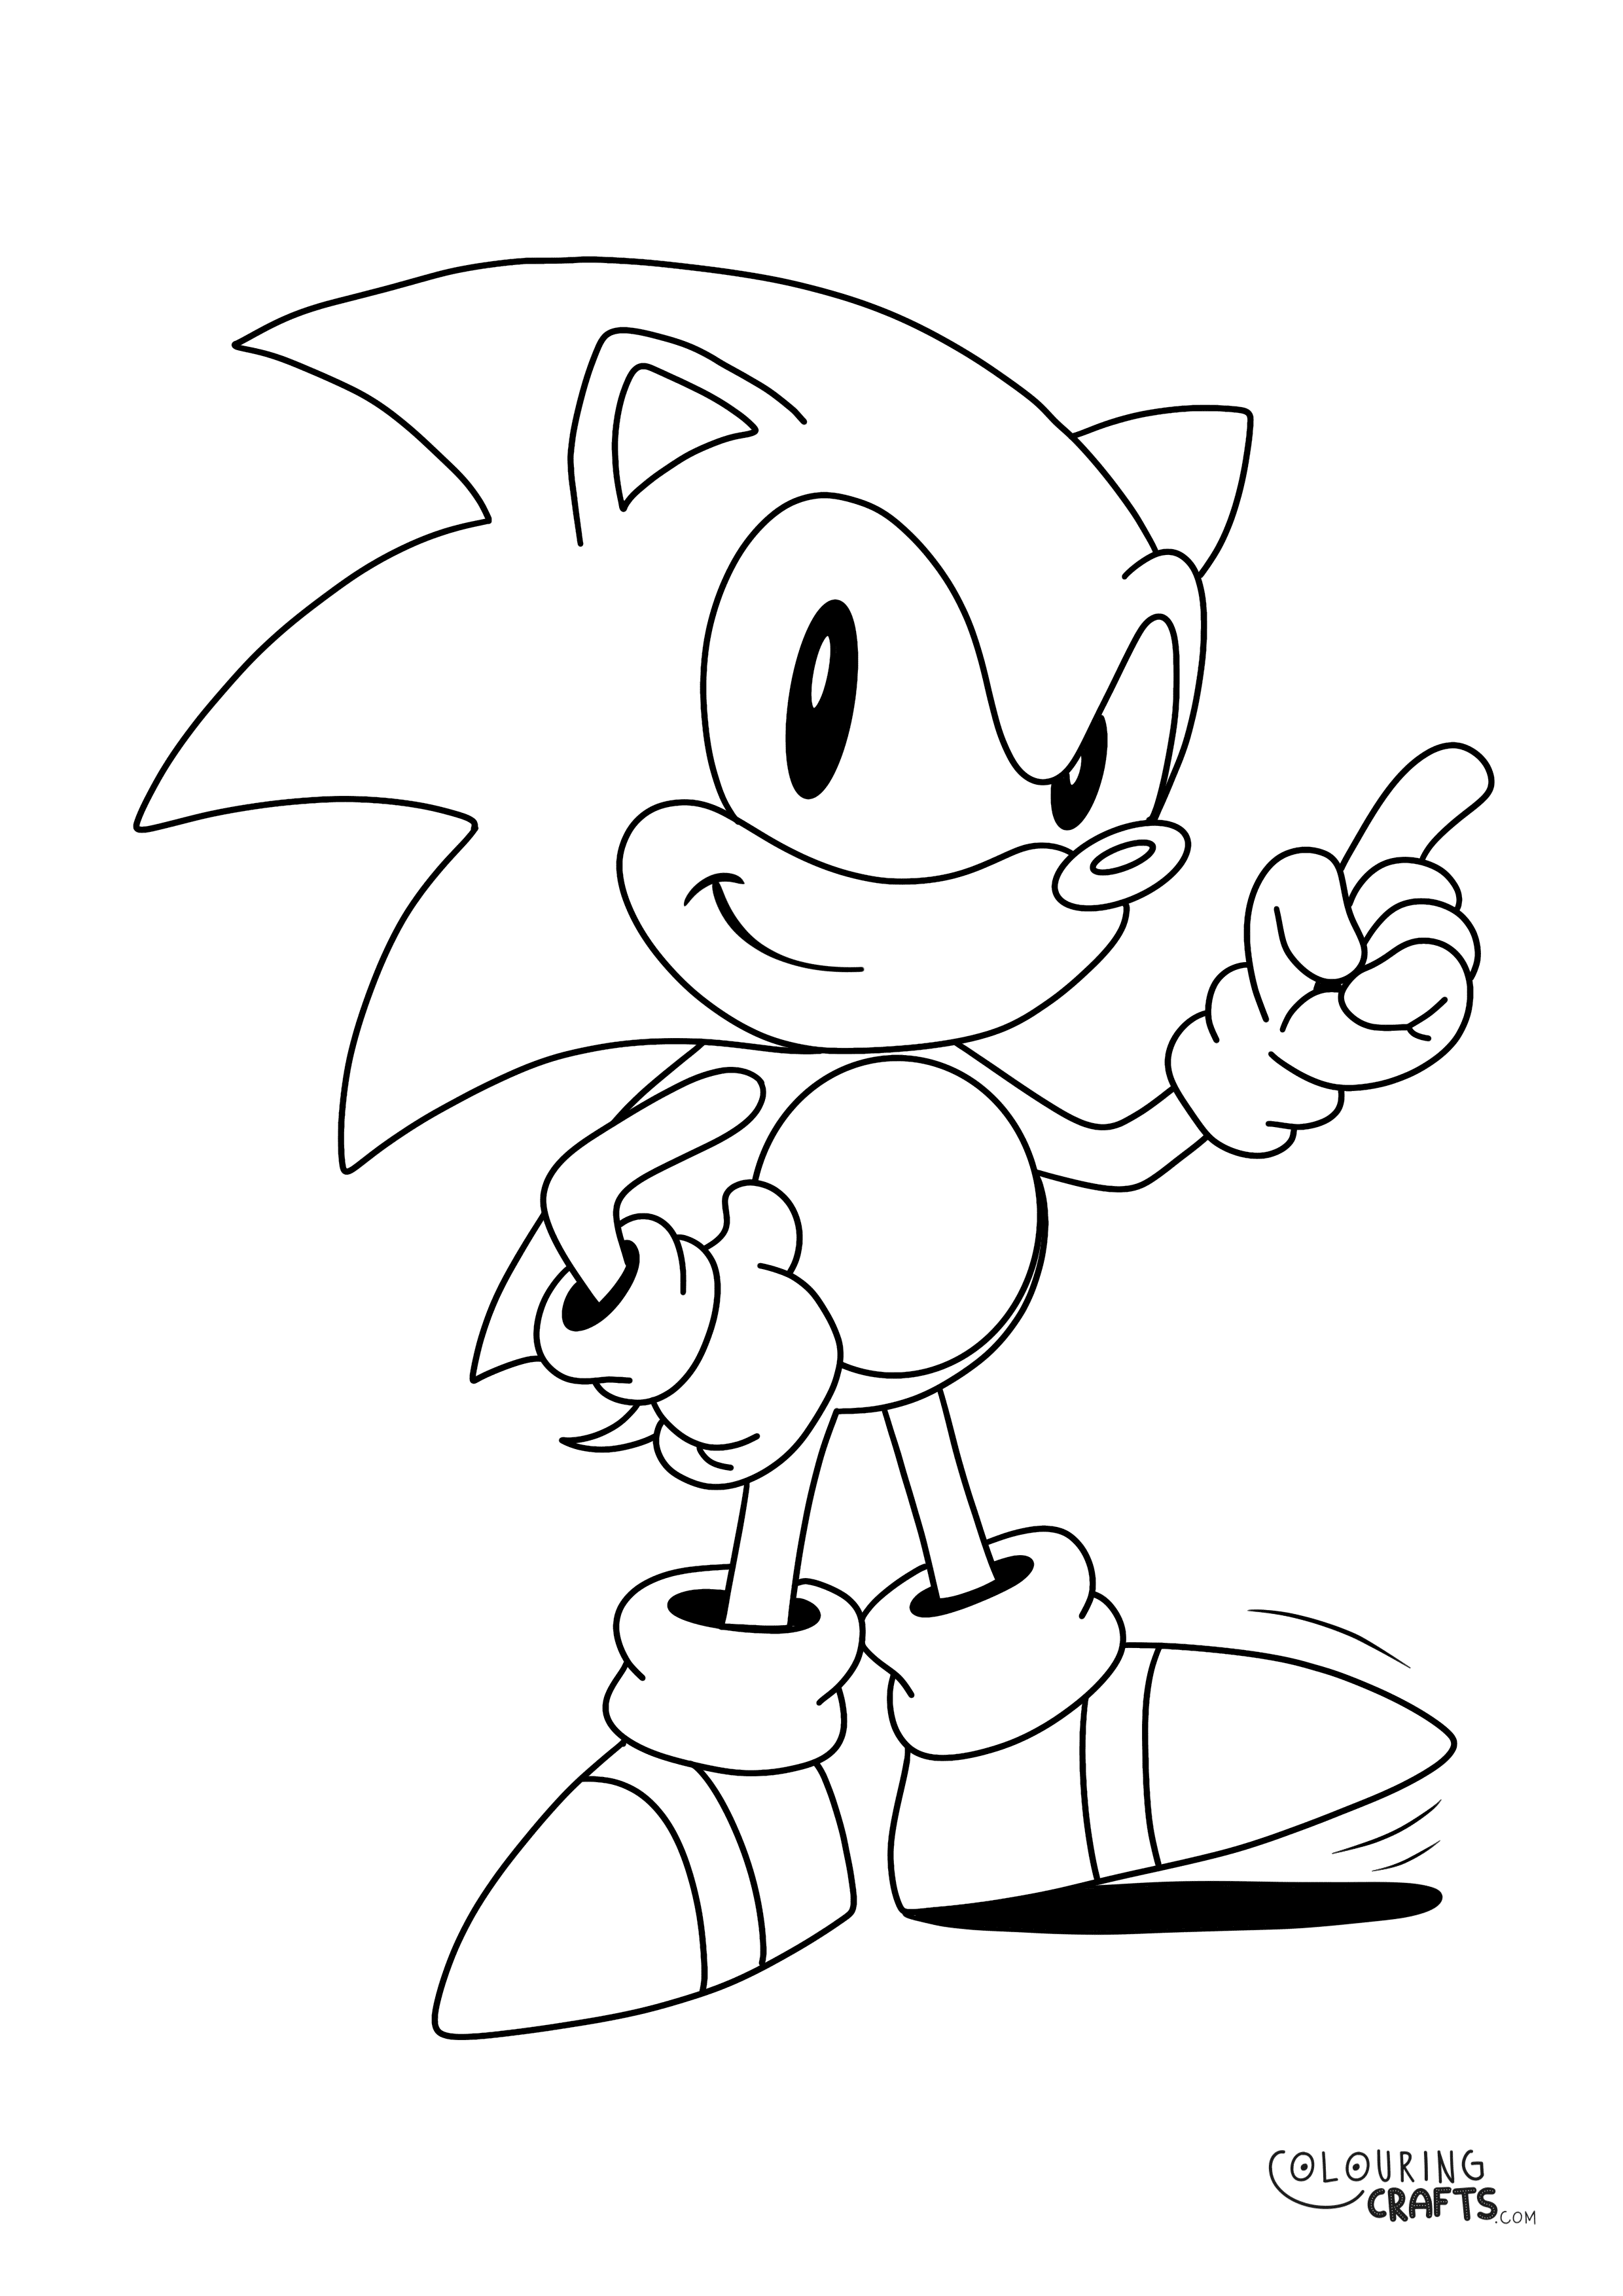 Sonic The Hedgehog Colouring Page 1 - Colouring Crafts